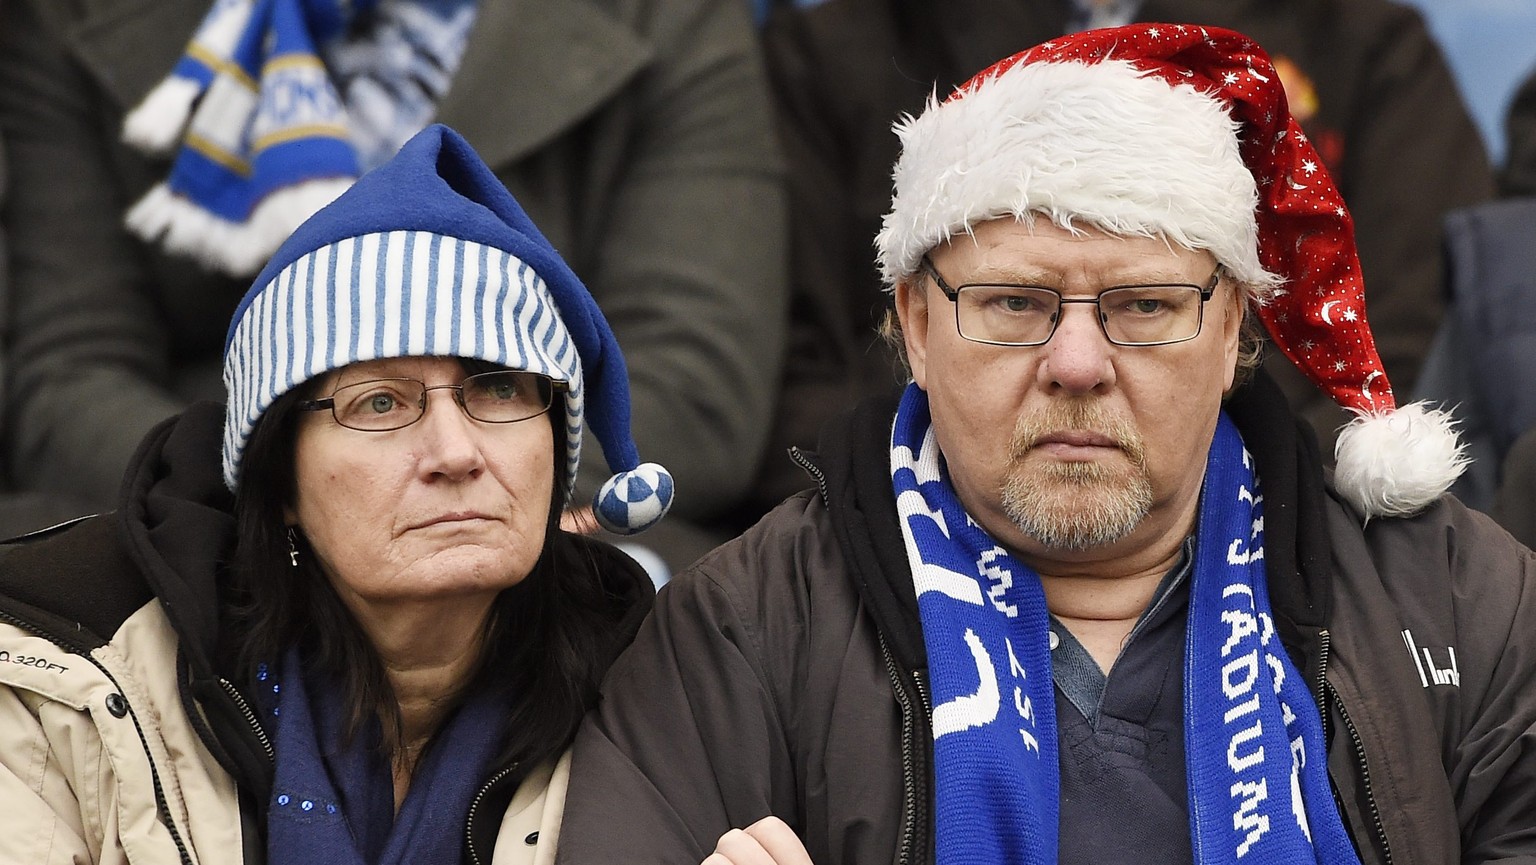 epa05081230 Chelsea supporters wearing festive hats before the start of the English Premier League soccer match between Chelsea and Watford at Stamford Bridge in London, Britain, 26 December 2015. EPA ...